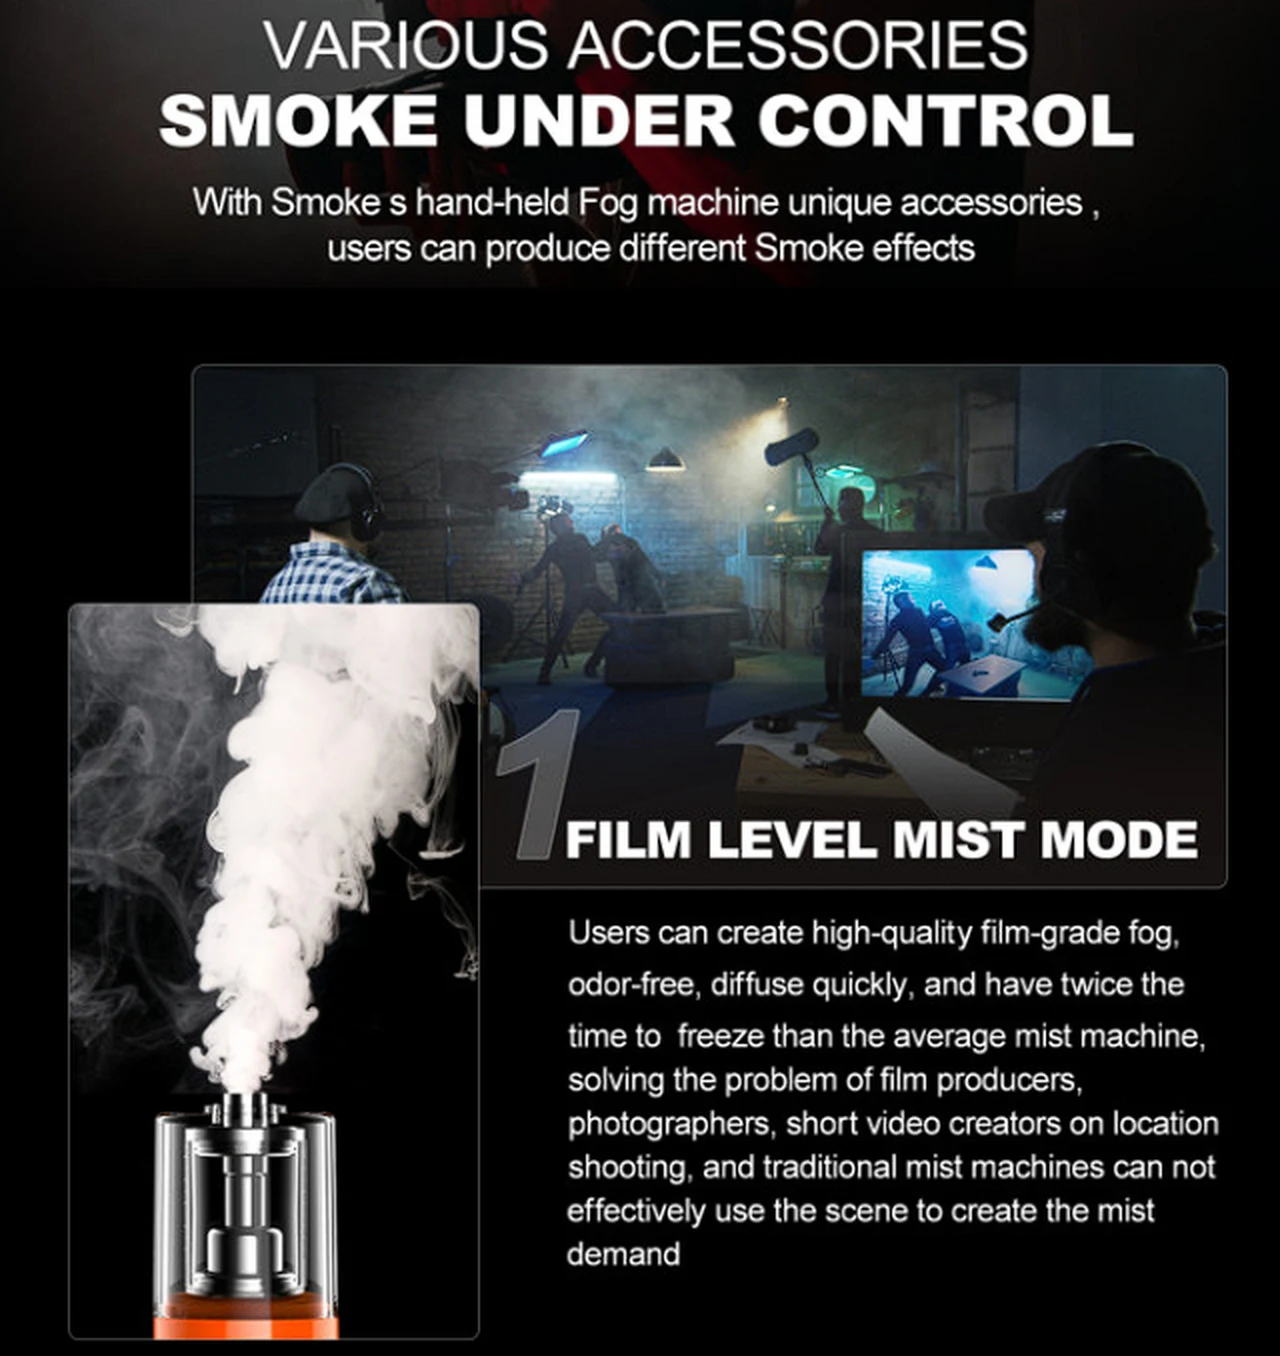 how to create film style mist and smoke effects using a fog machine